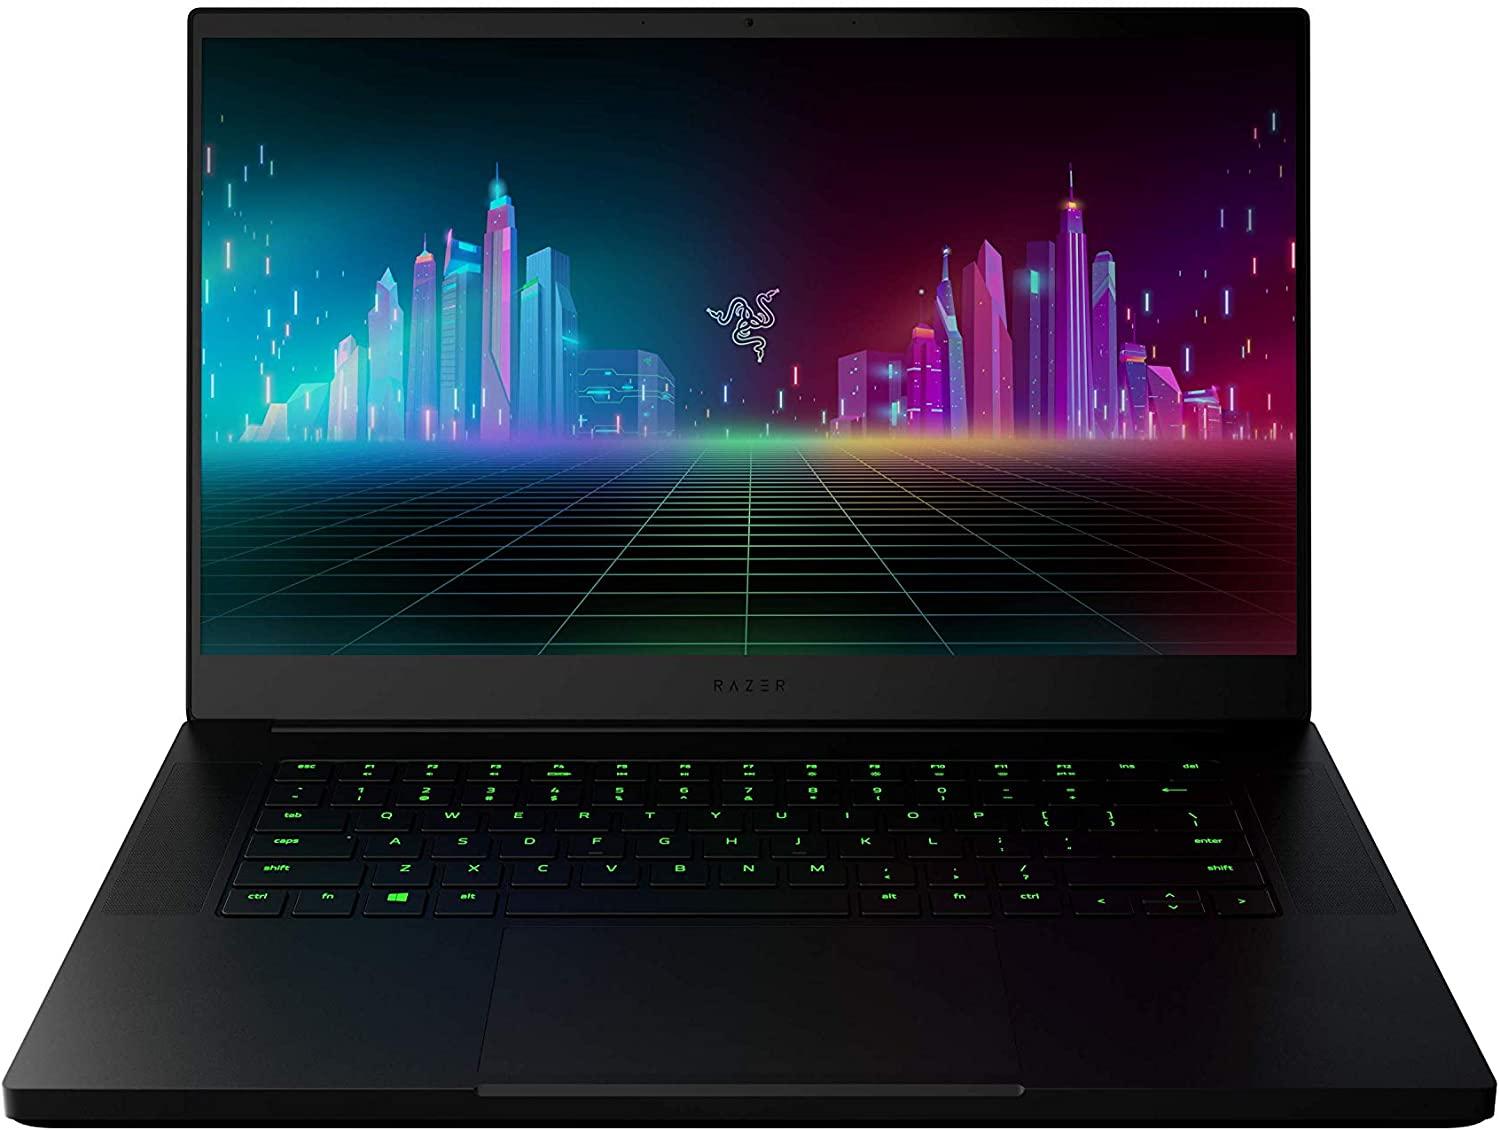 Razer Blade 15 i7 16GB 256GB Gaming Notebook Laptop for $1099.99 Shipped